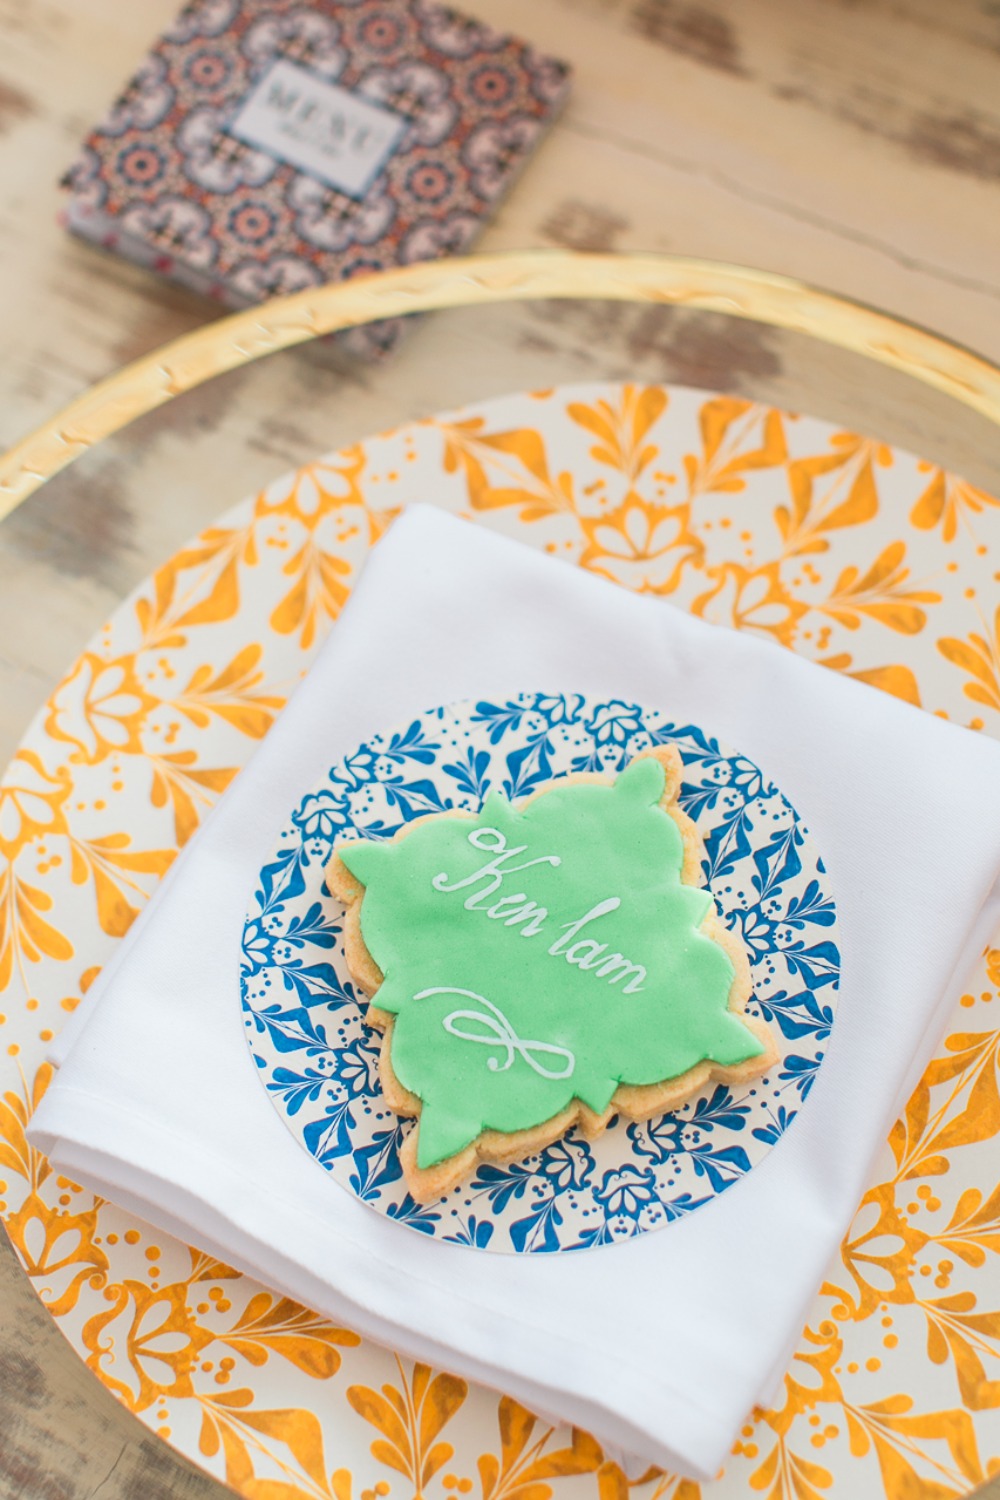 Cookie place card